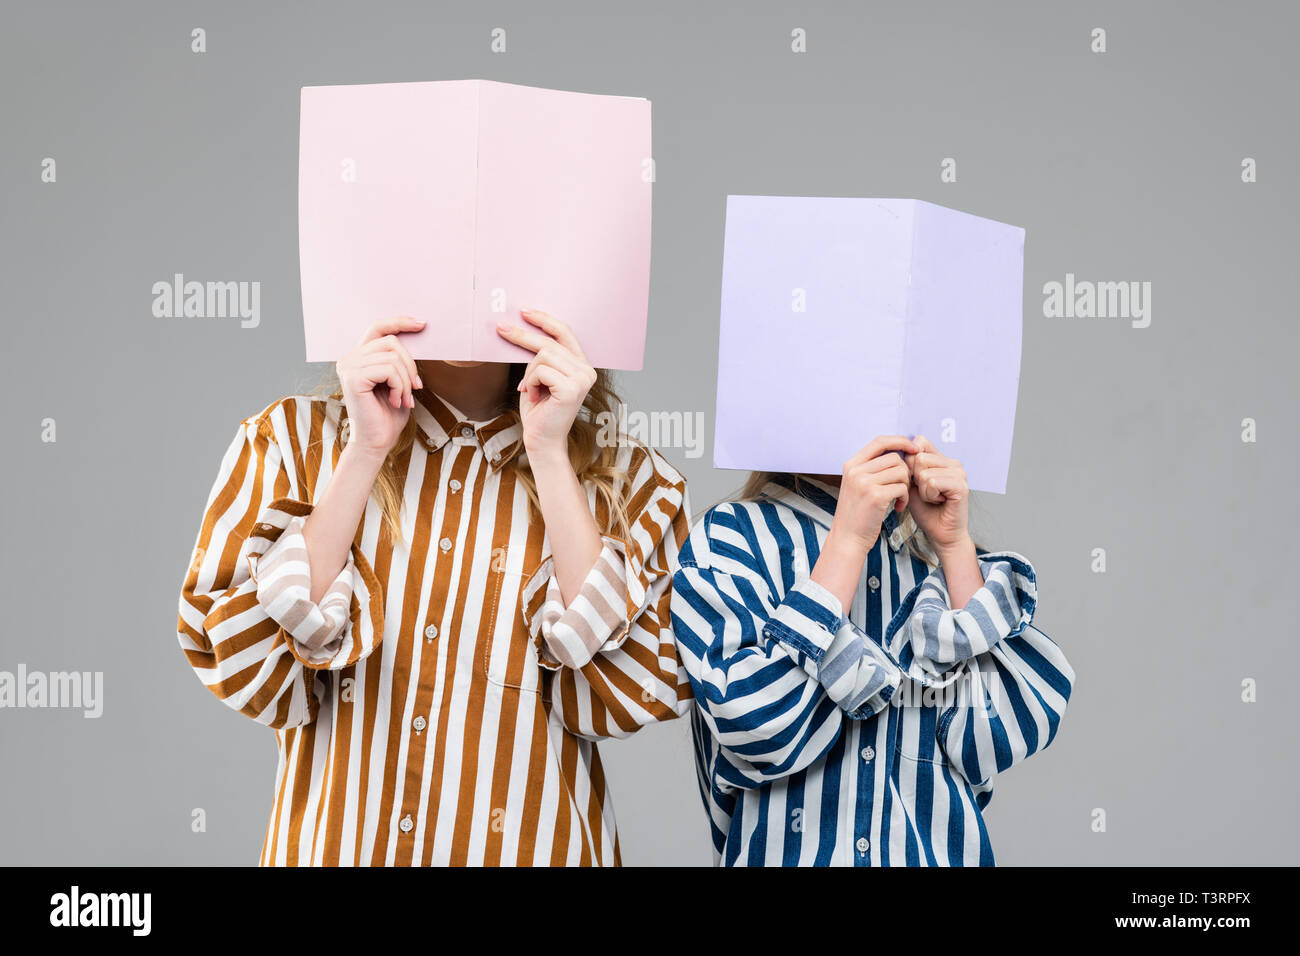 Girls in colorful striped oversize shirts covering their faces Stock Photo